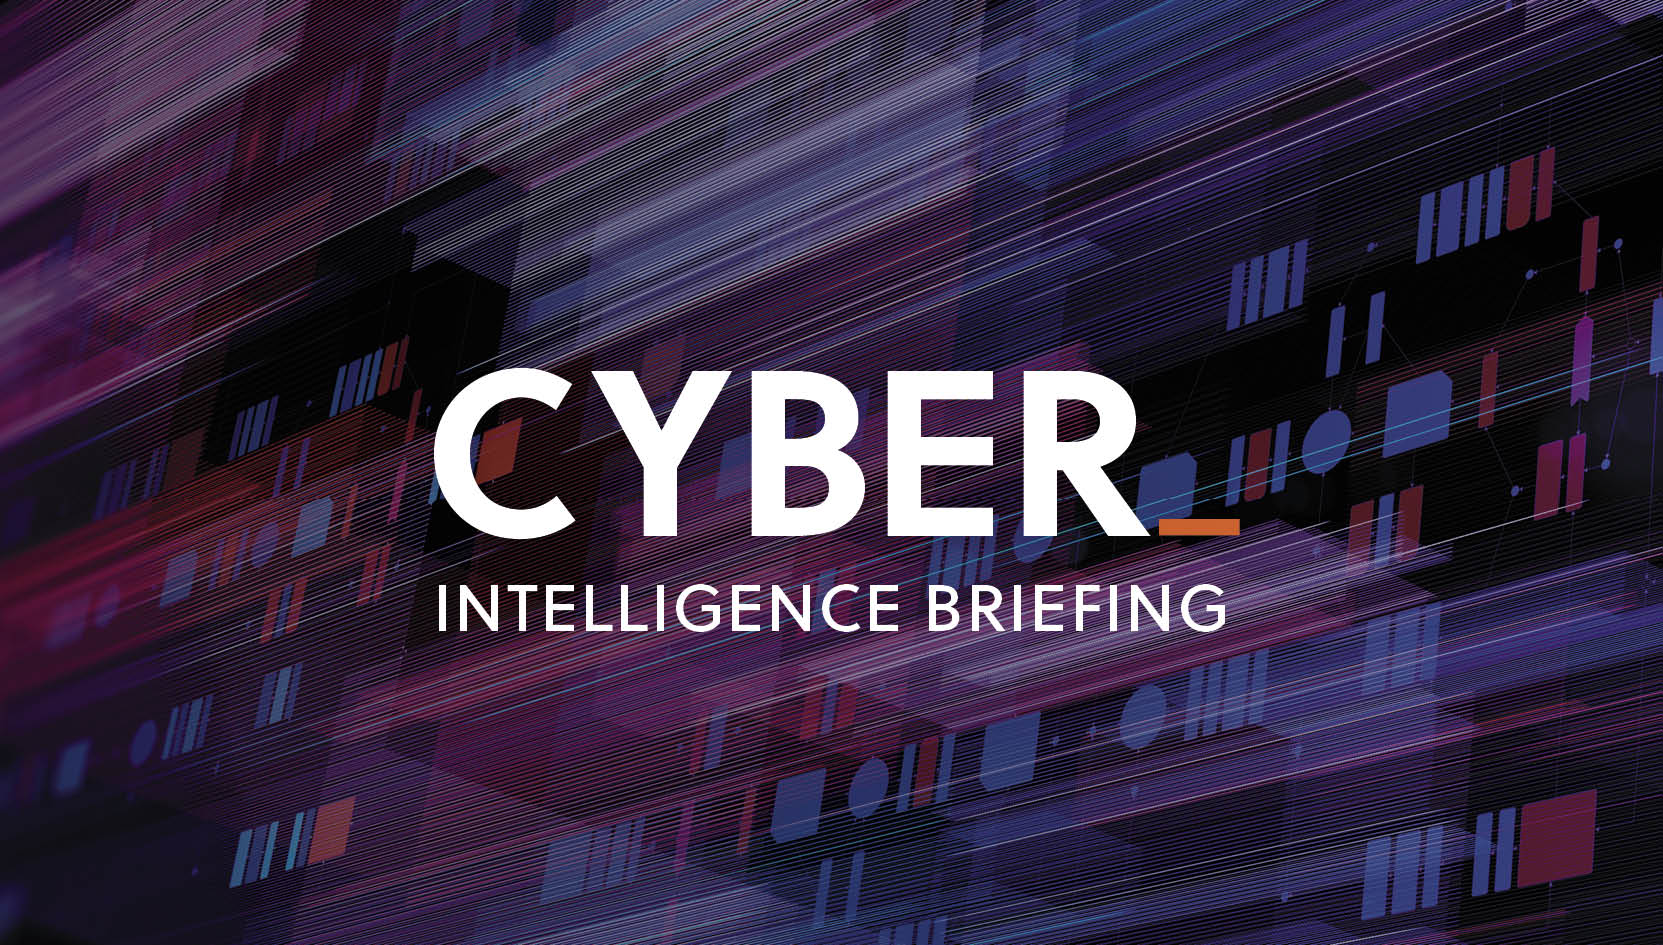 Global Cyber Security Intelligence News